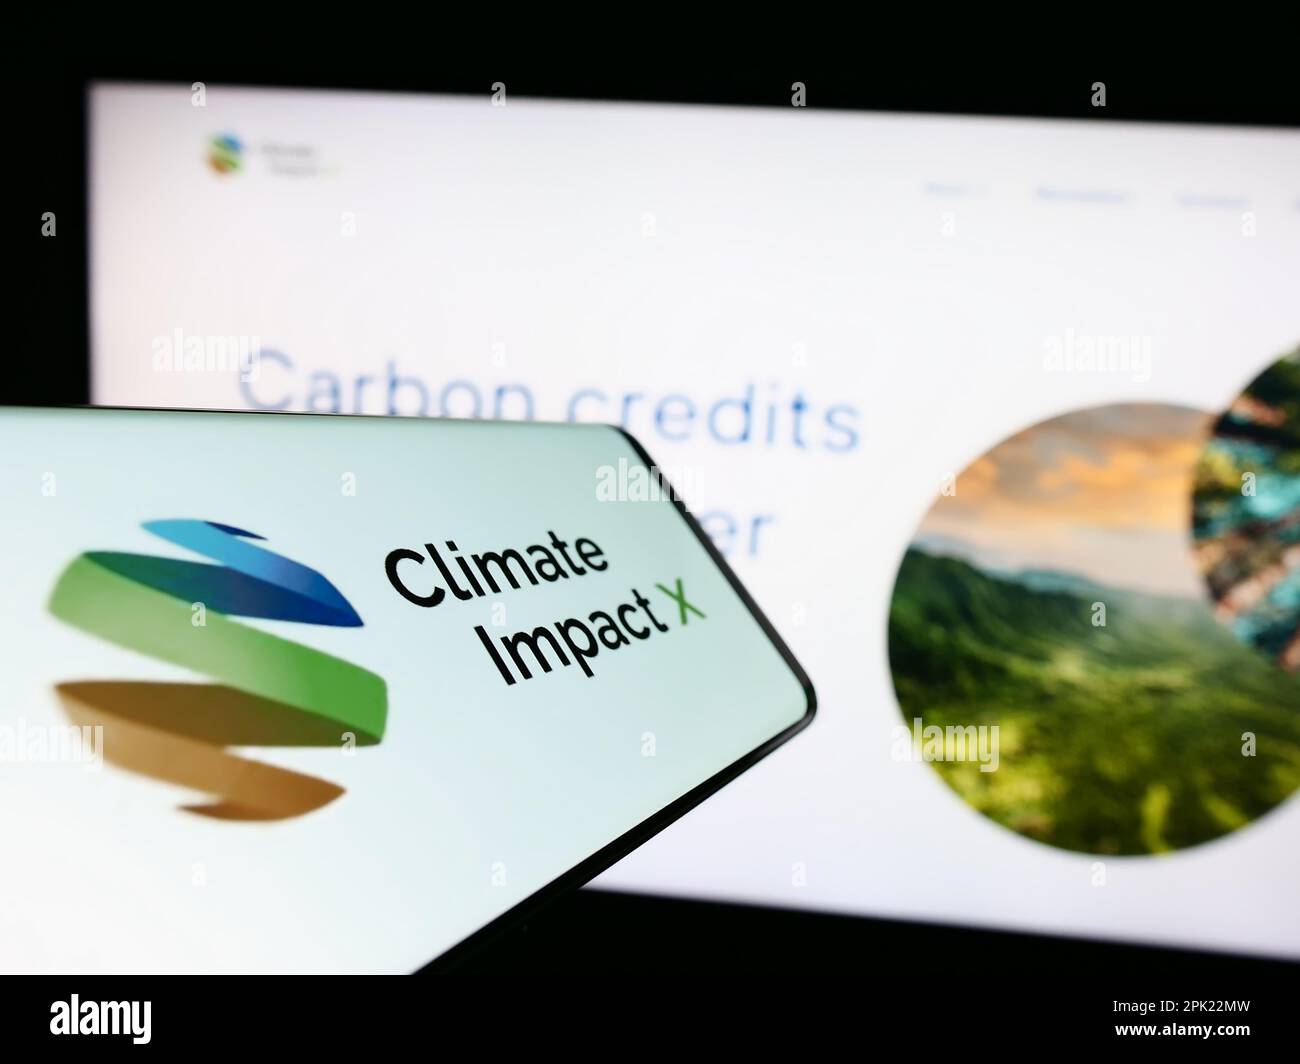 Smartphone with website of carbon exchange Climate Impact X (CIX) on screen in front of business business logo. Focus on center of phone display. Stock Photo